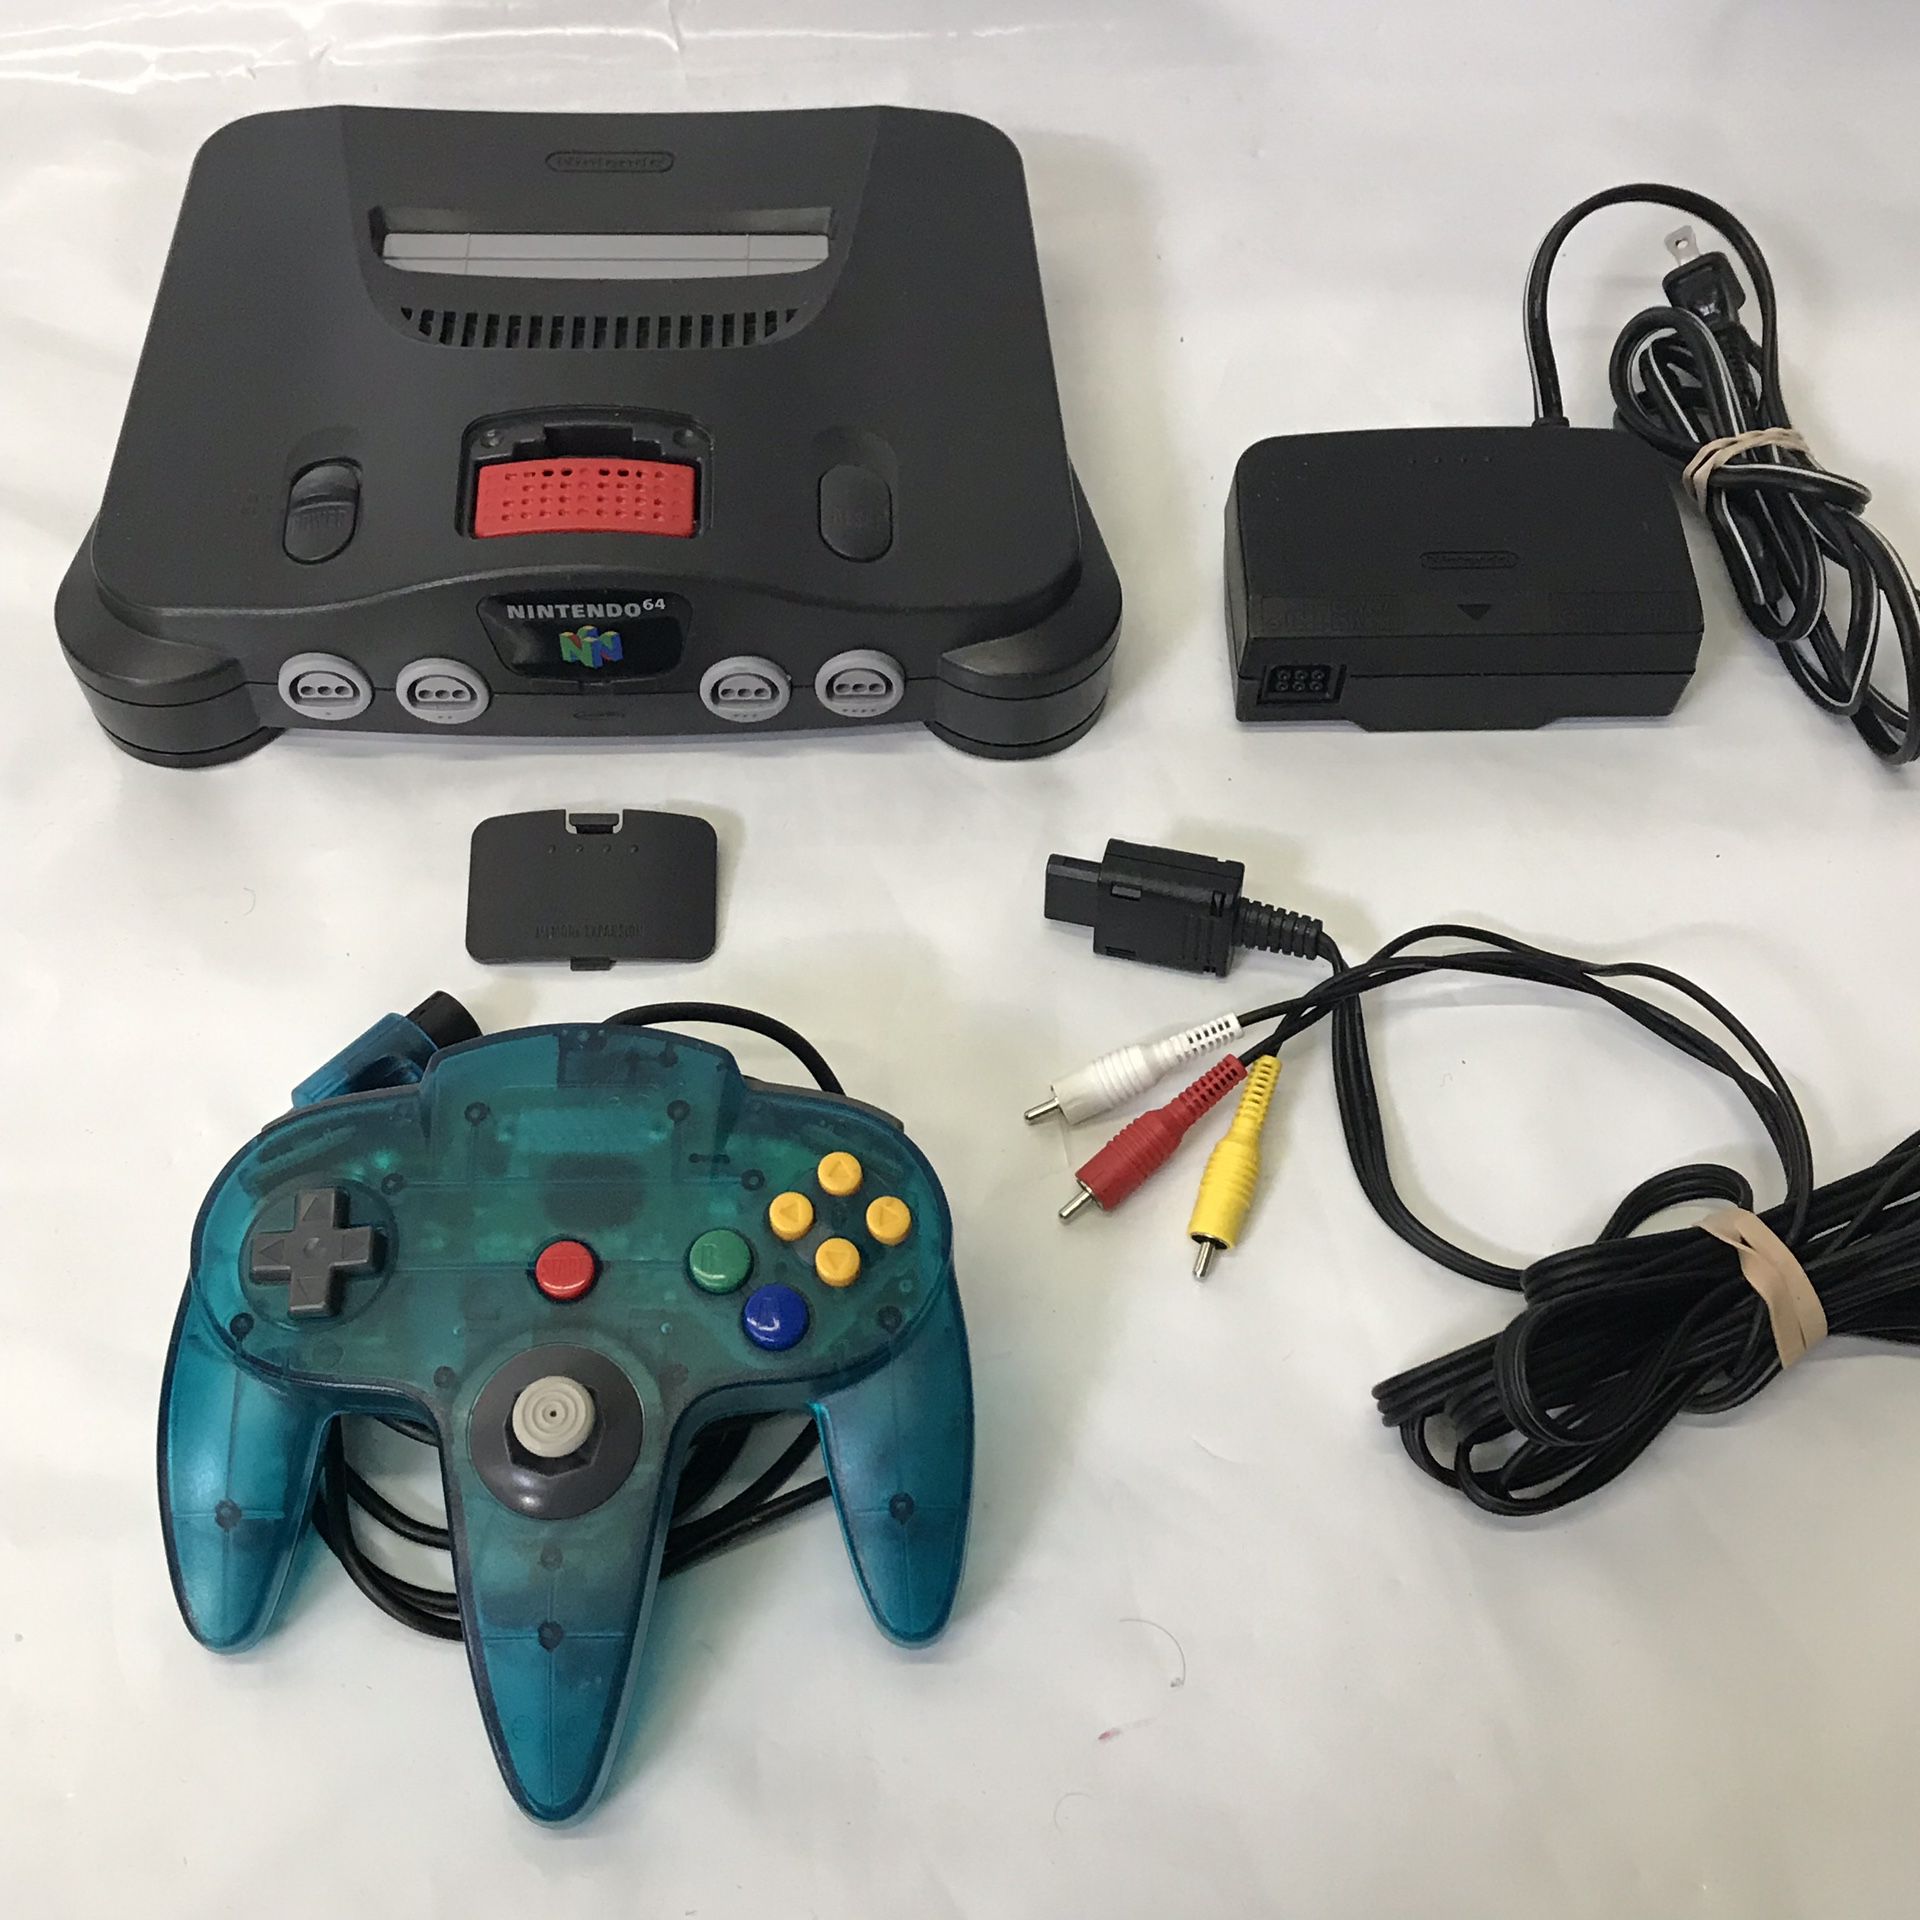 Nintendo 64 n64 system console with 1 controller and cables